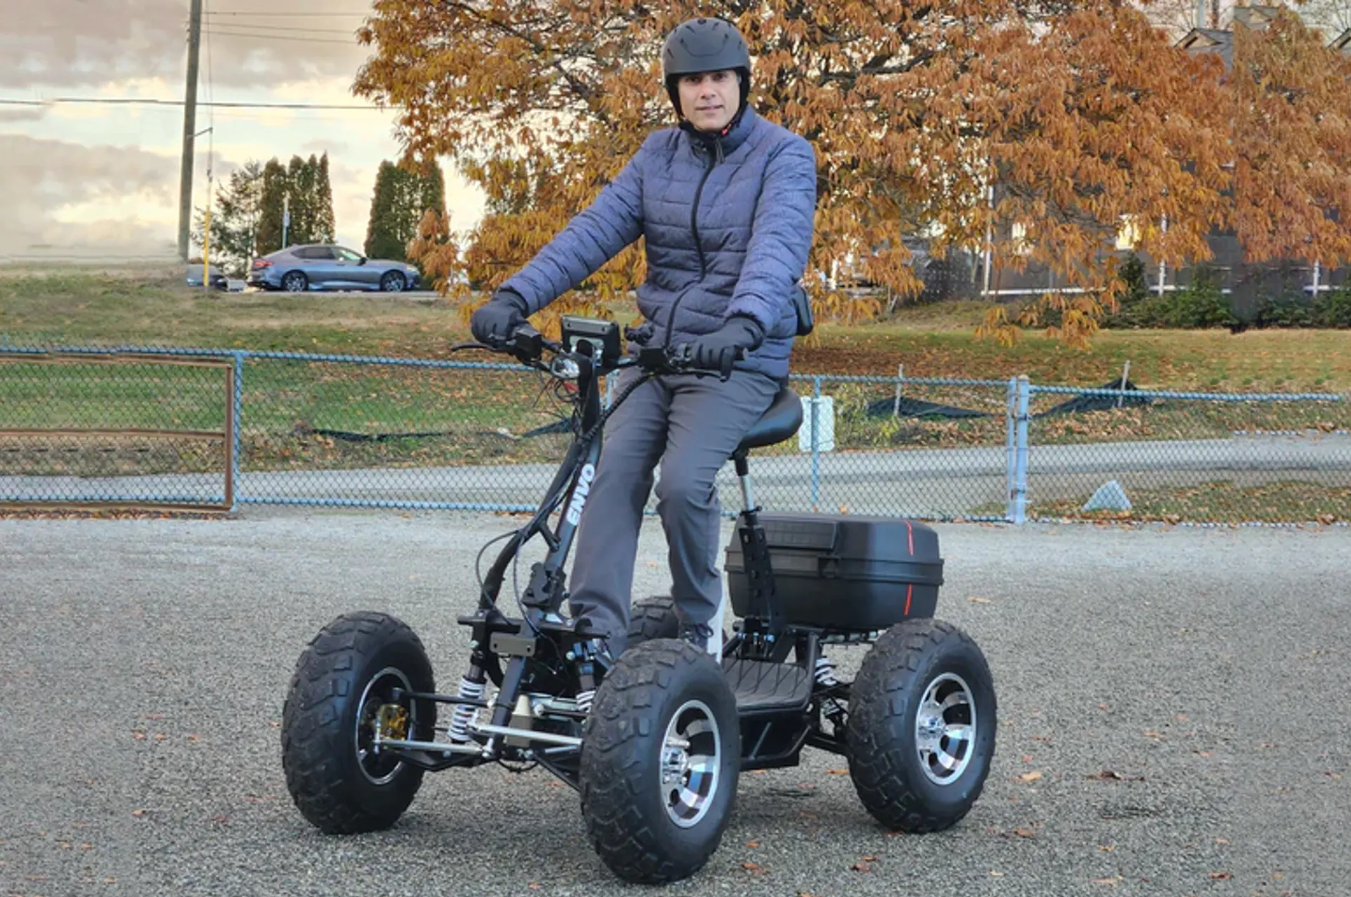 Envo e-ATV is made for silent and stealthy off-roading